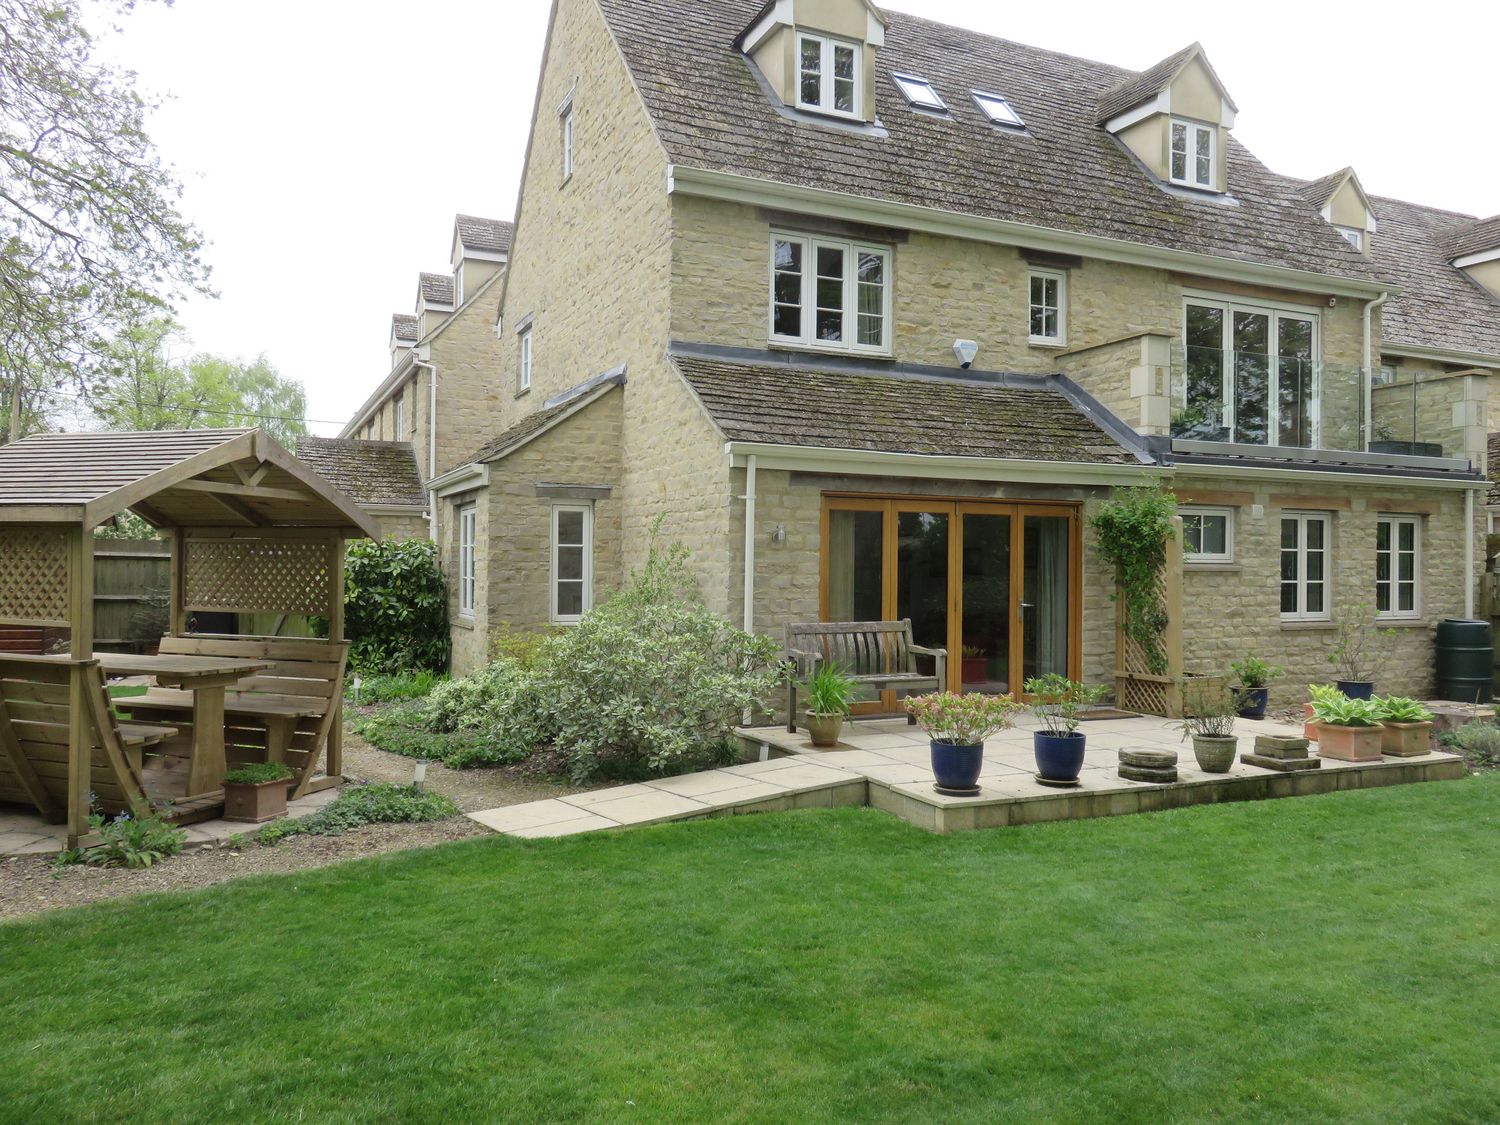 5 Burford Mews - Cotswolds - 988757 - photo 1